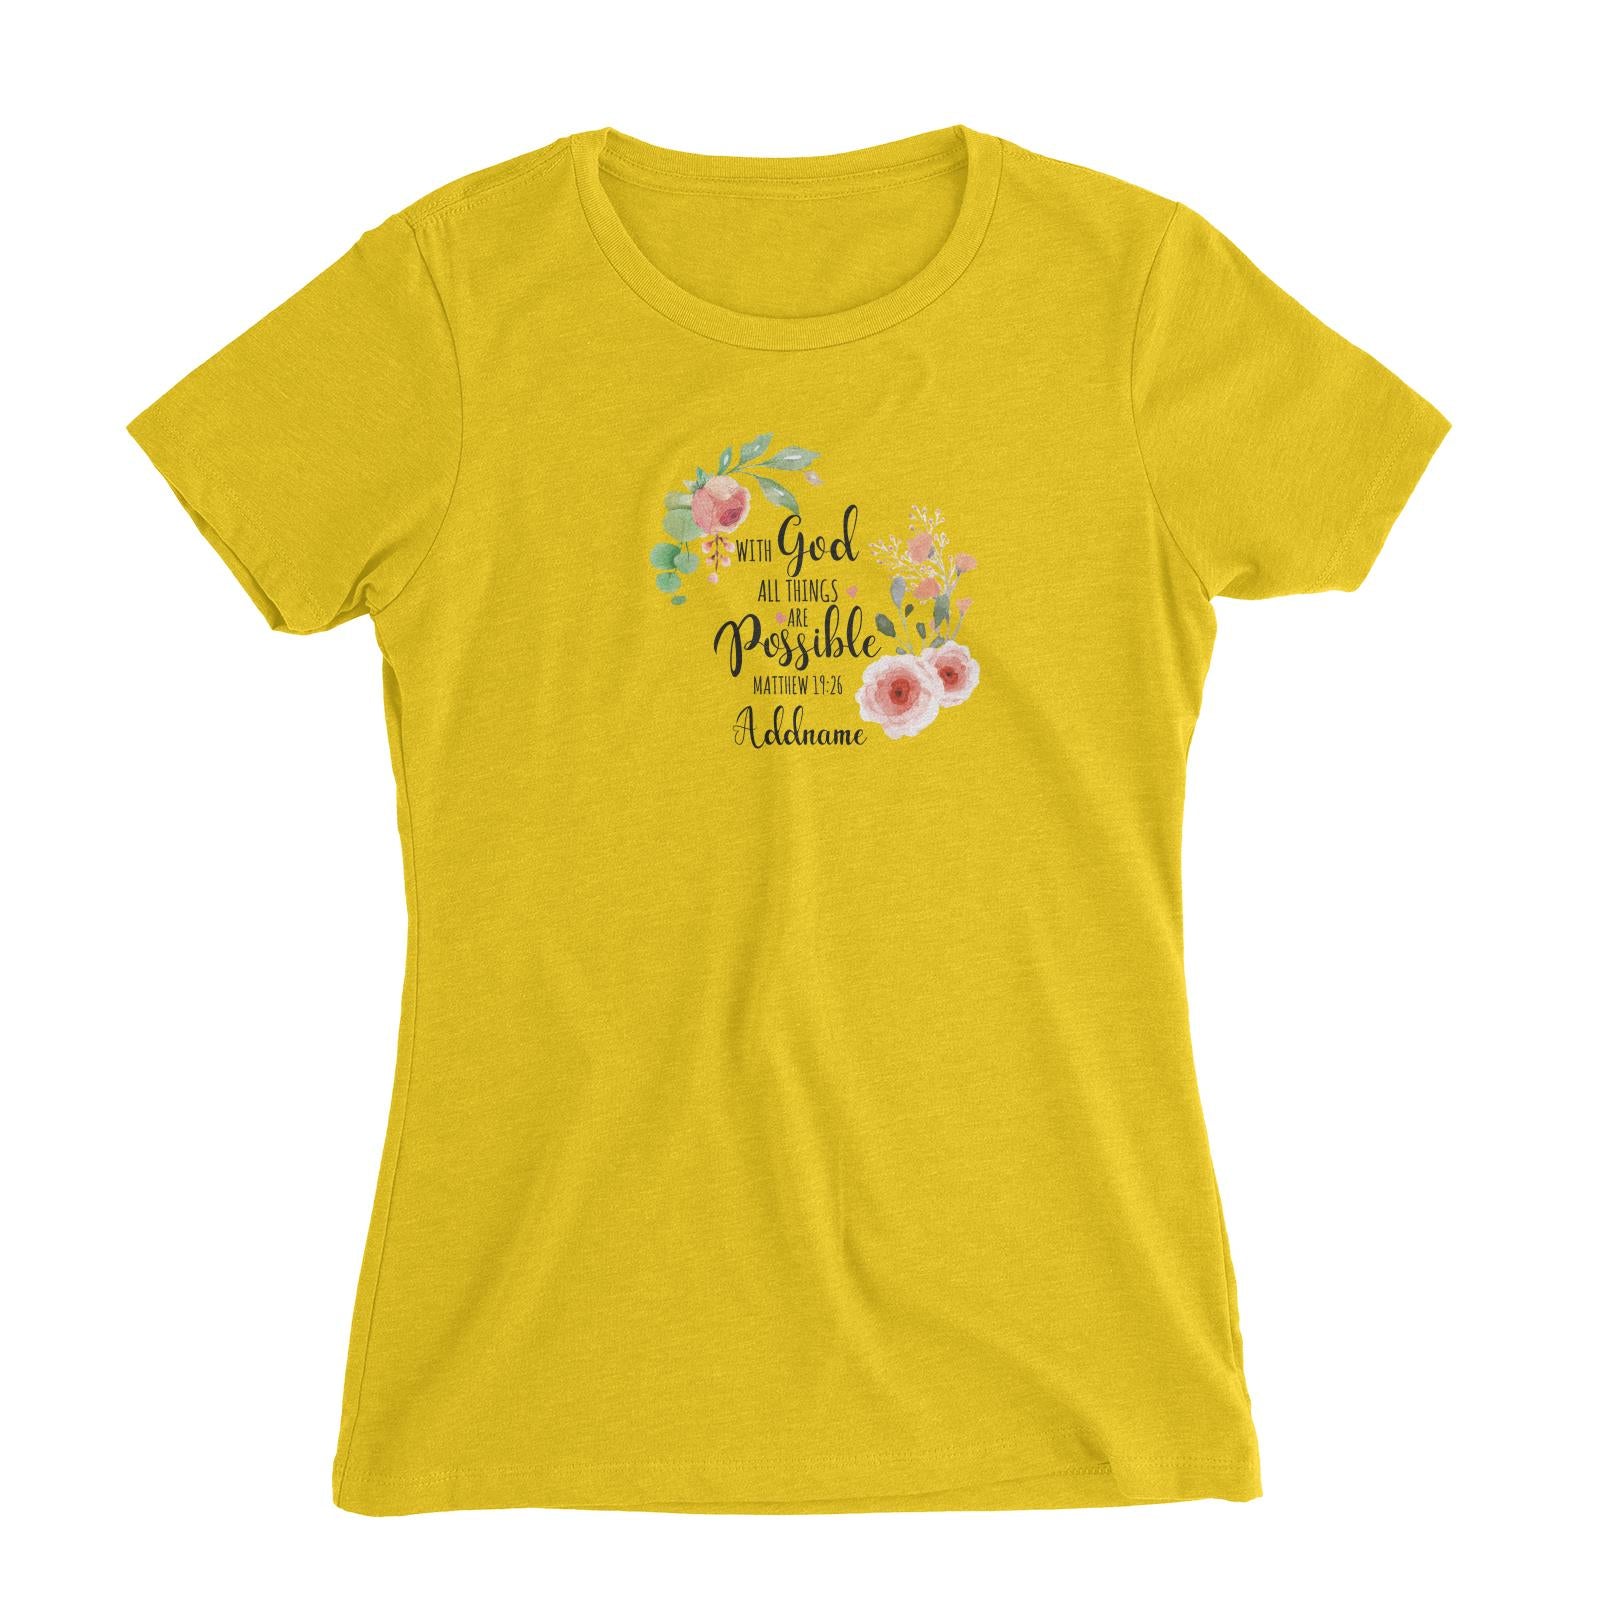 Gods Gift With God All Things Are Possible Matthew 19.26 Addname Women Slim Fit T-Shirt